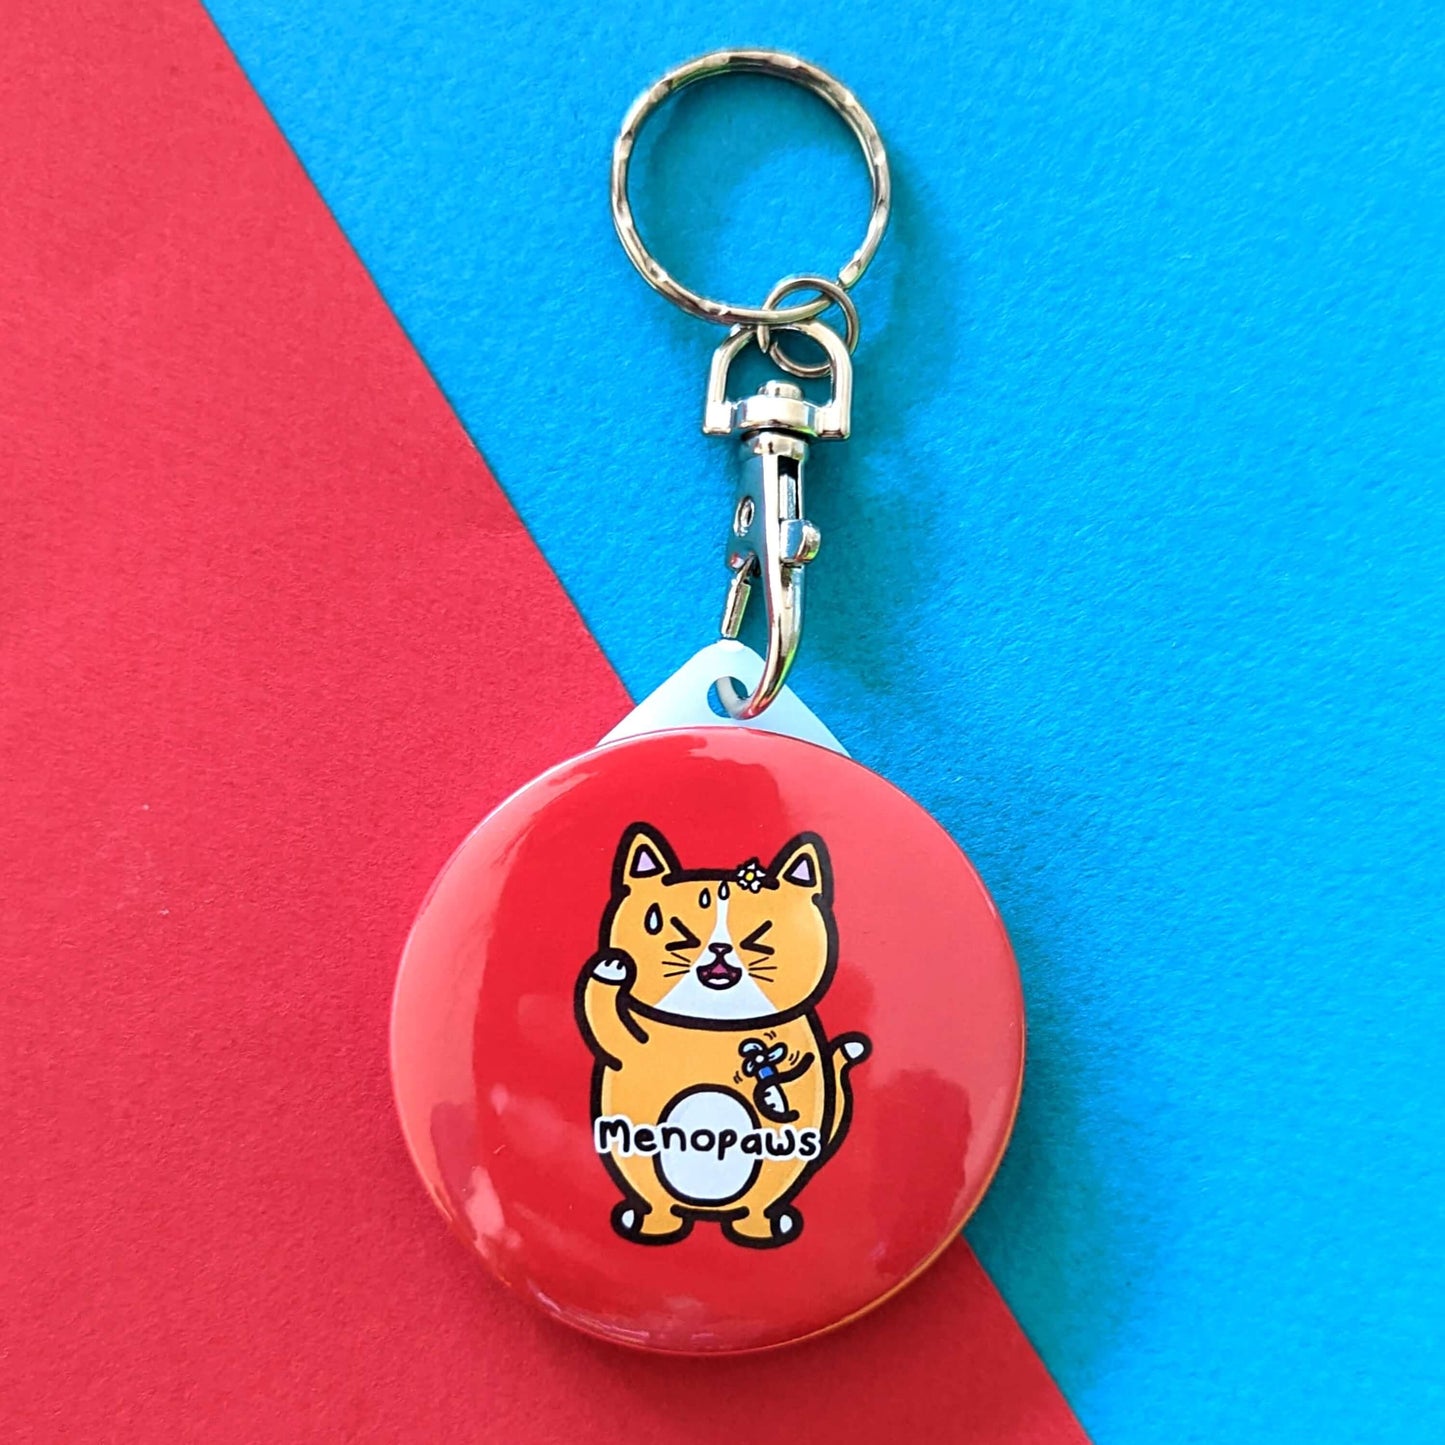 The Menopaws Cat Keyring - Menopause on a red and blue background. The red circular keychain features a stressed sweating orange cat standing up holding a blue mini fan, underneath in black text reading 'menopaws'. Raising awareness for the menopause and menopausal symptoms.